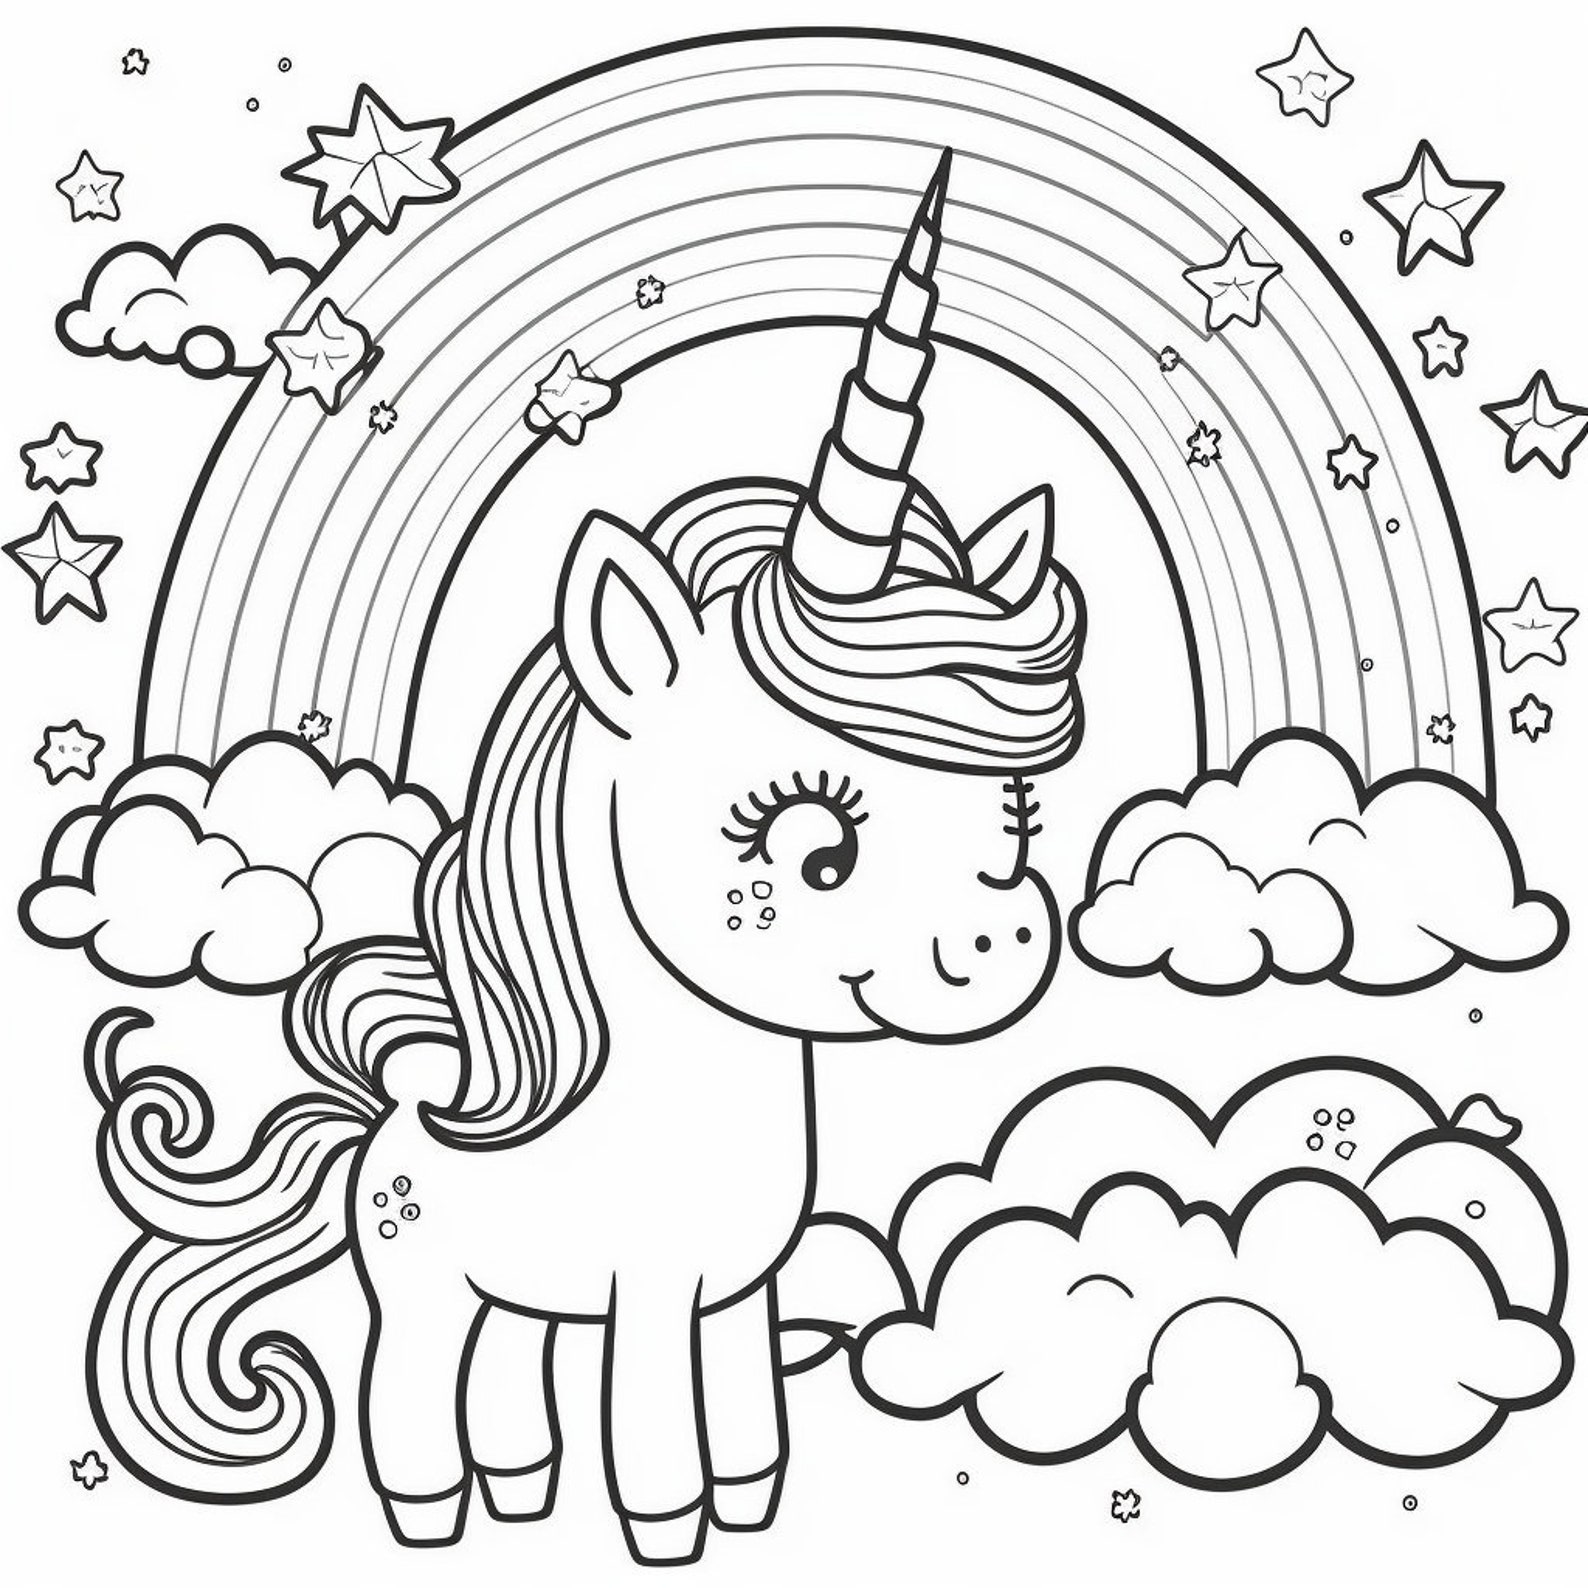 38-unicorn-coloring-pages-for-kids-coloring-pages-unicorn-etsy